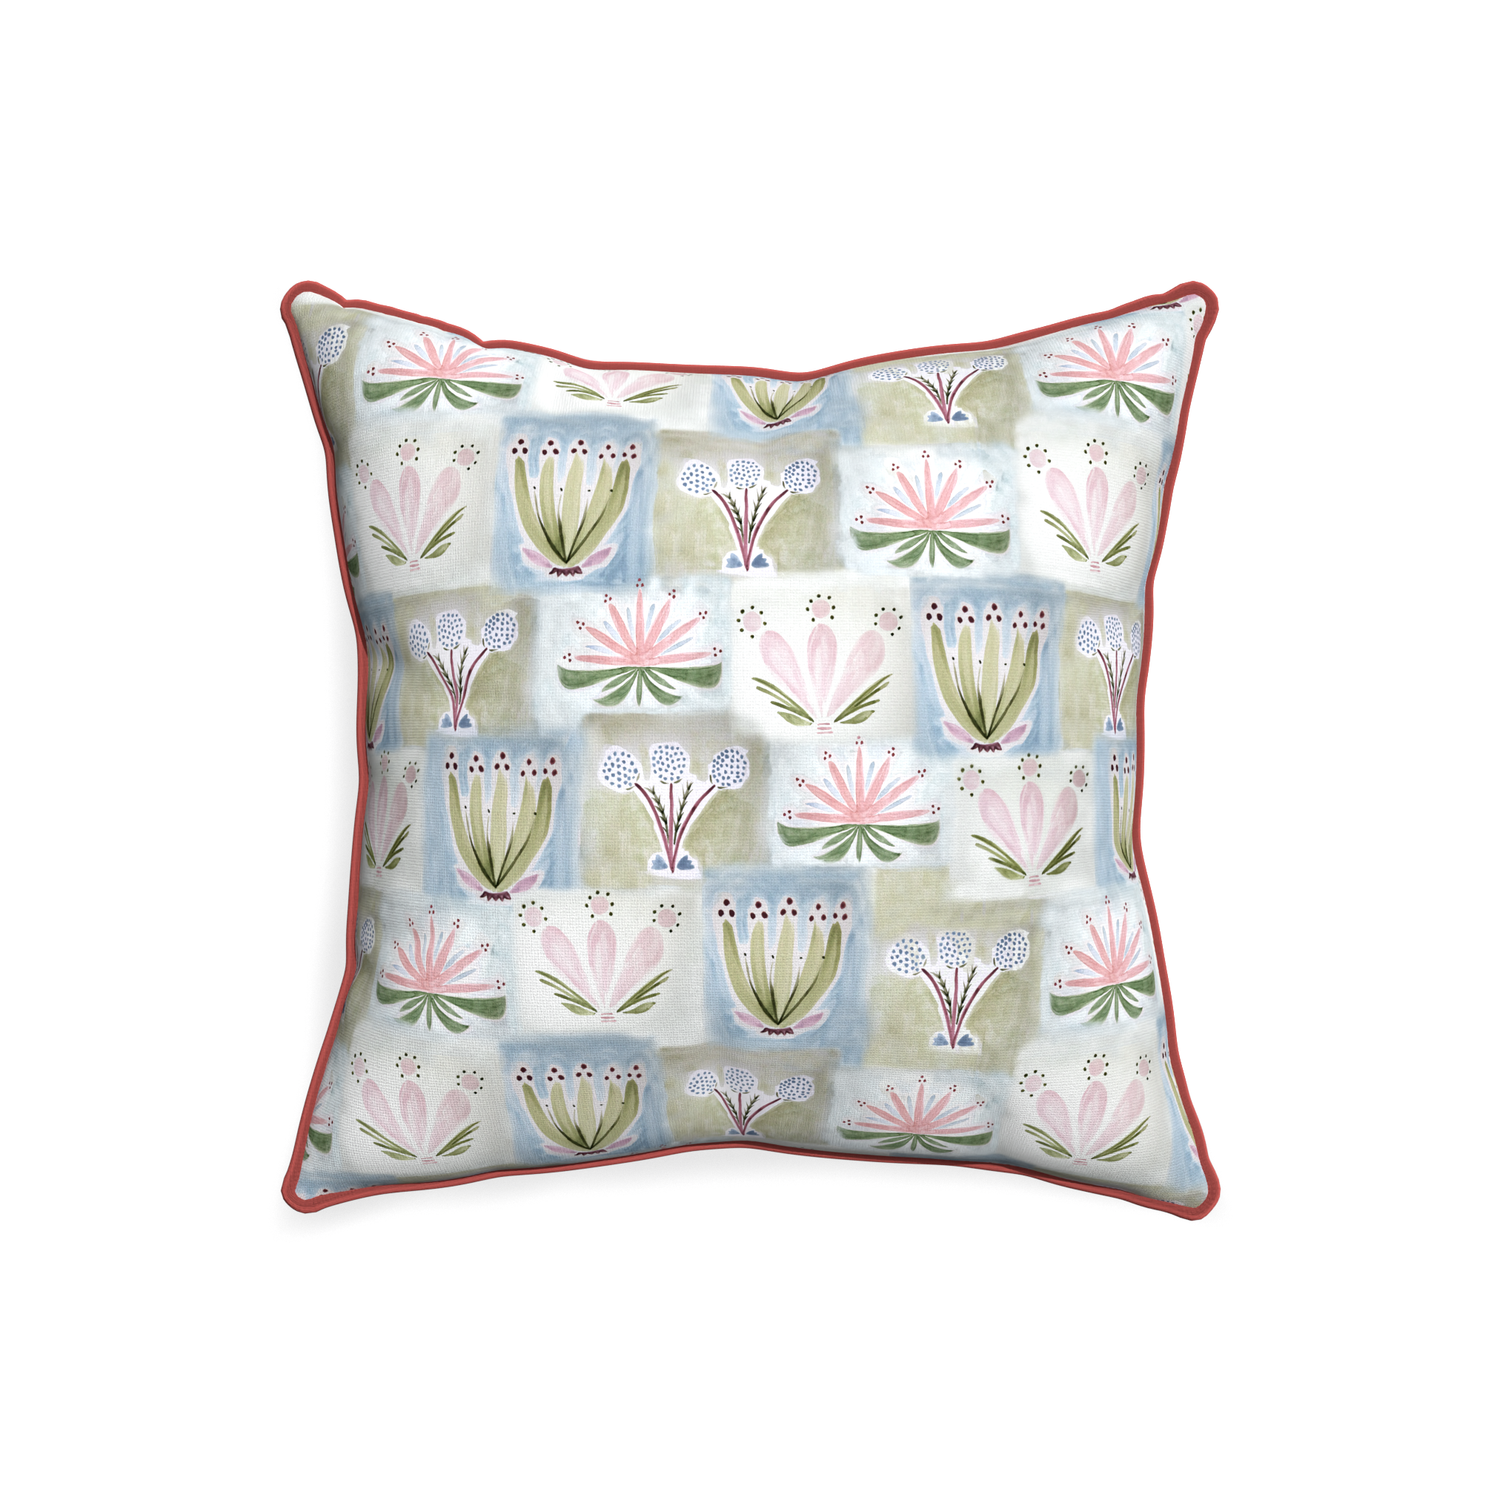 20-square harper custom hand-painted floralpillow with c piping on white background